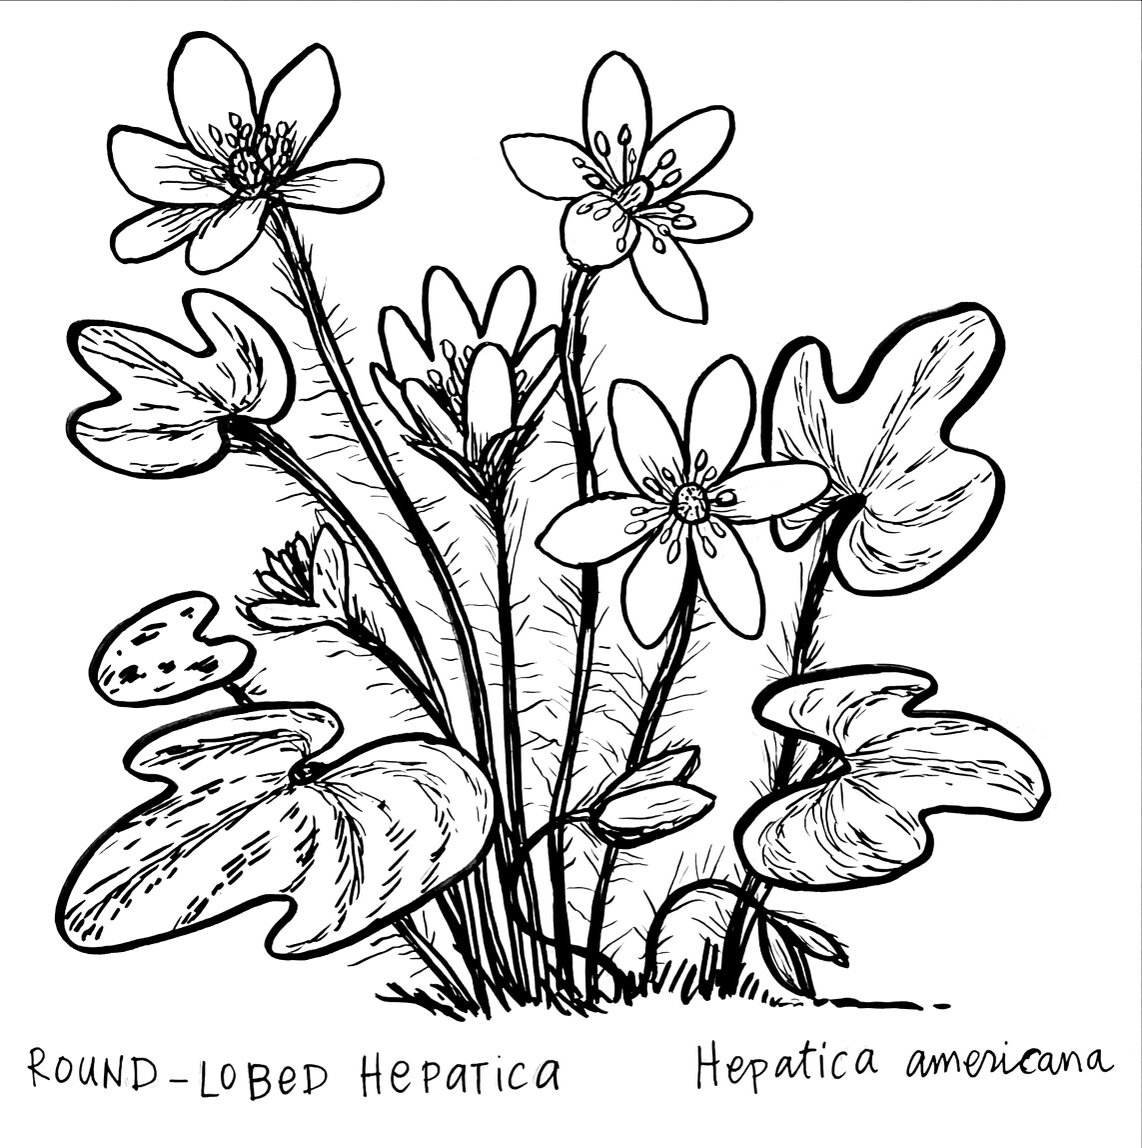 Day 7 = one week in the bag! Round-lobed hepatica. Another in the spring ephemeral series. 

This is also known as &quot;liverleaf,&quot; because once someone thought the leaves were liver-shaped, which must have meant they were good for the liver. T